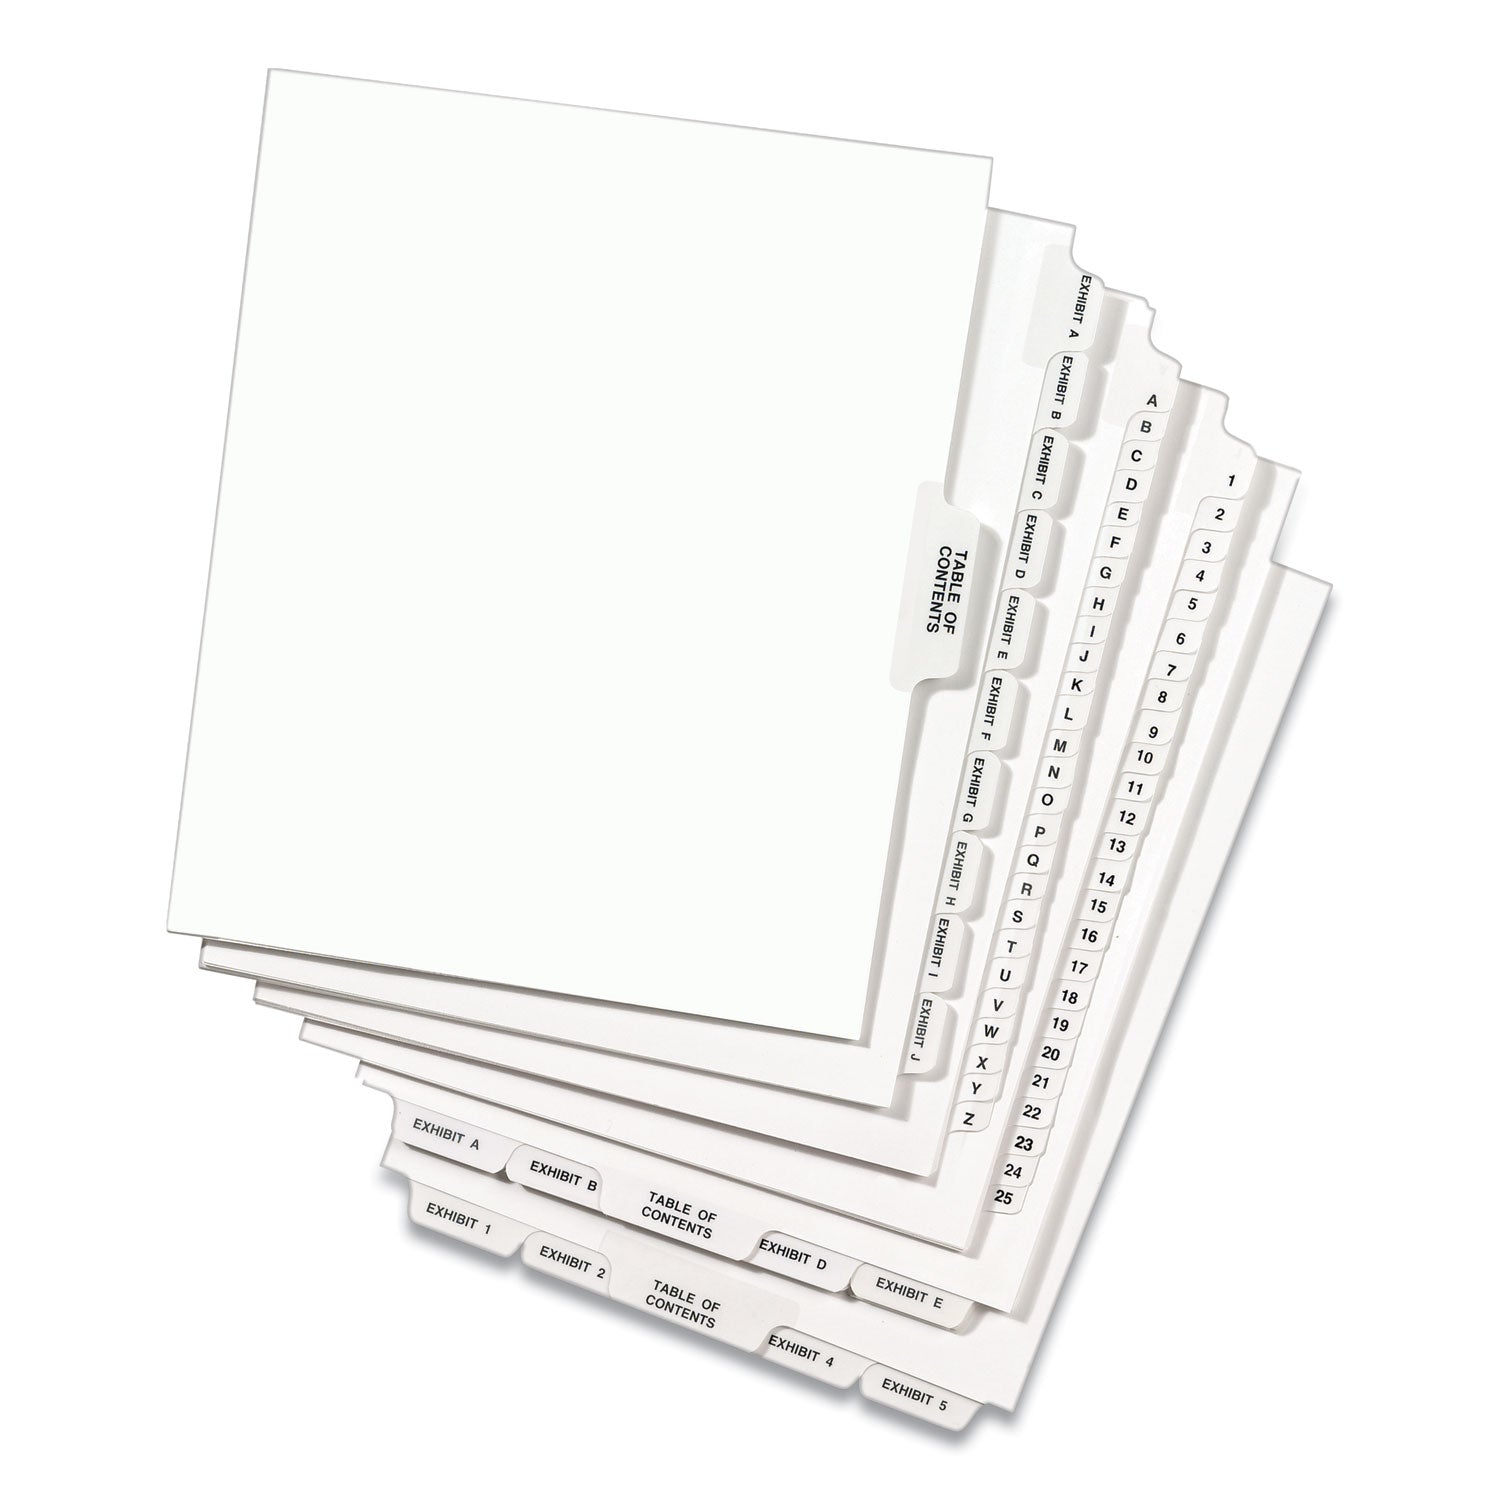 Preprinted Legal Exhibit Side Tab Index Dividers, Avery Style, 26-Tab, A to Z, 11 x 8.5, White, 1 Set, (1400) - 